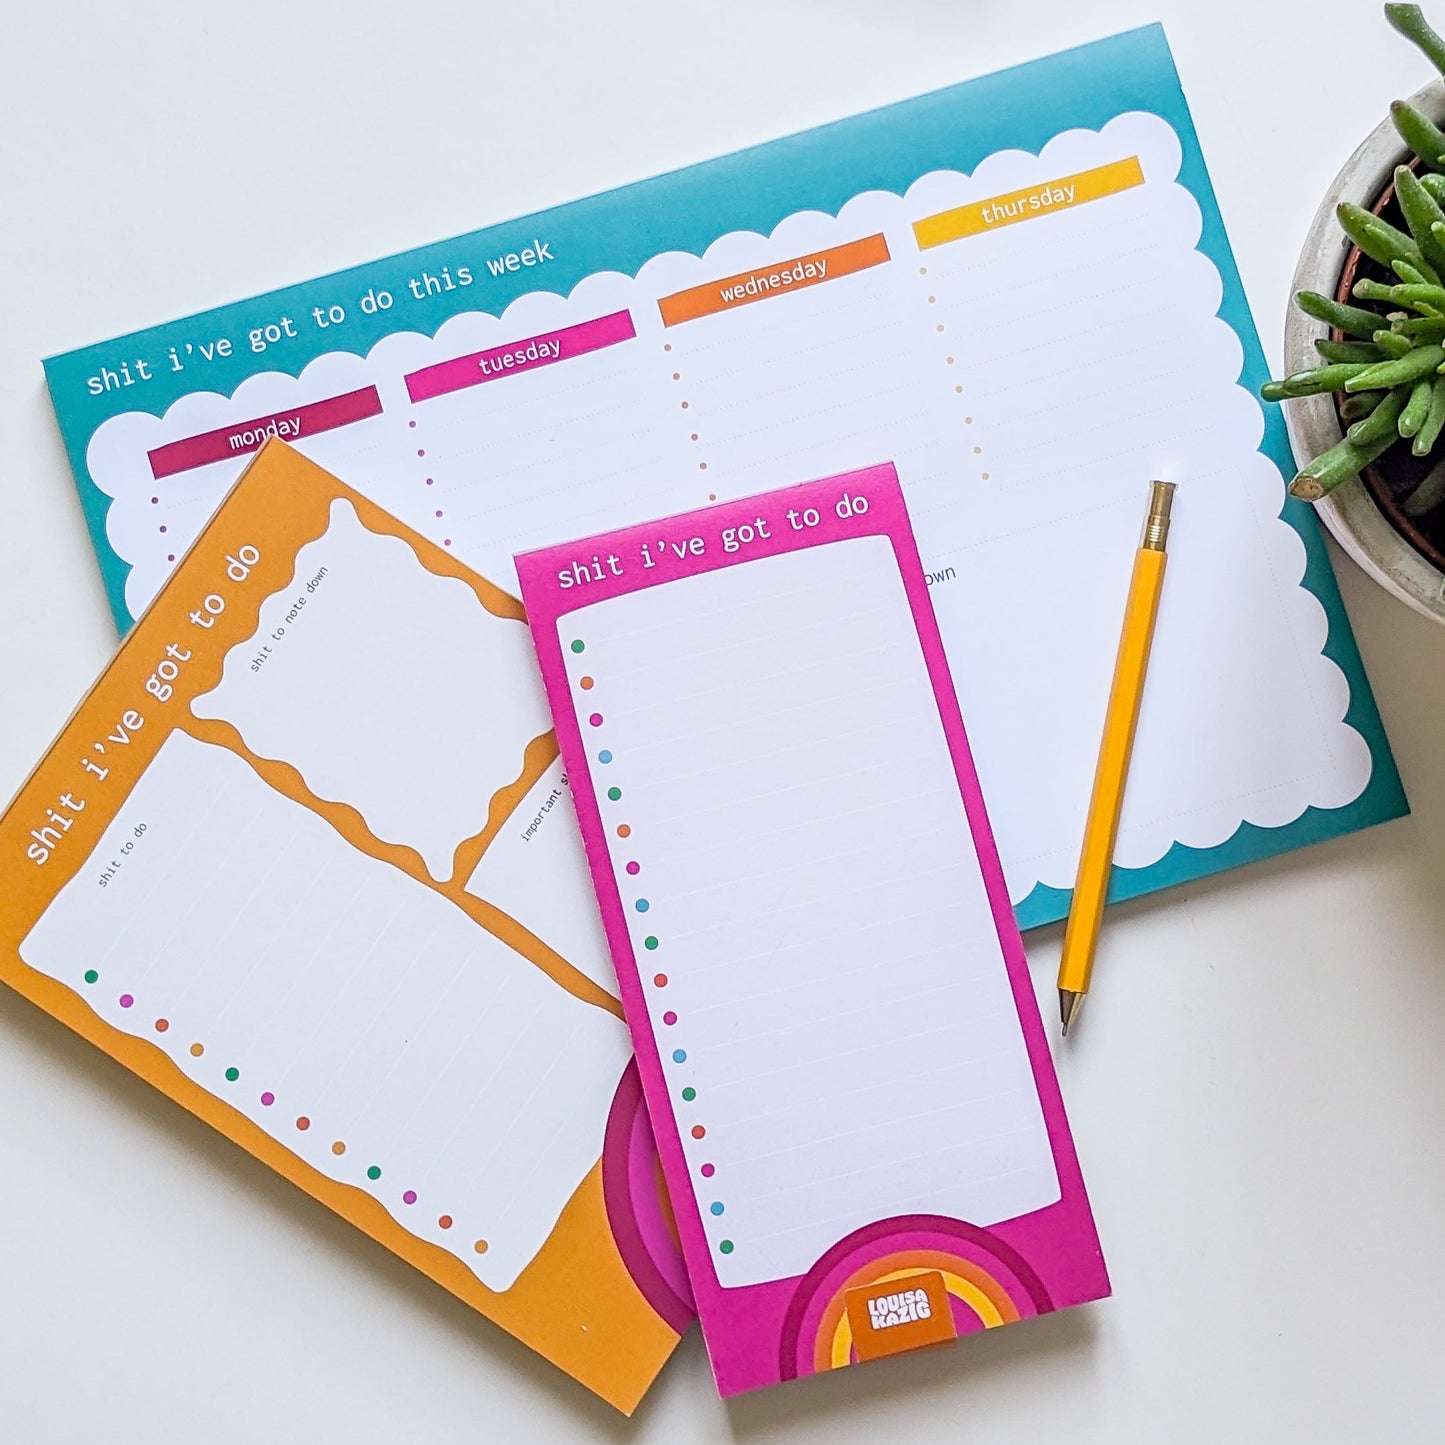 Weekly A4 Notepad - Get shit done desk planner